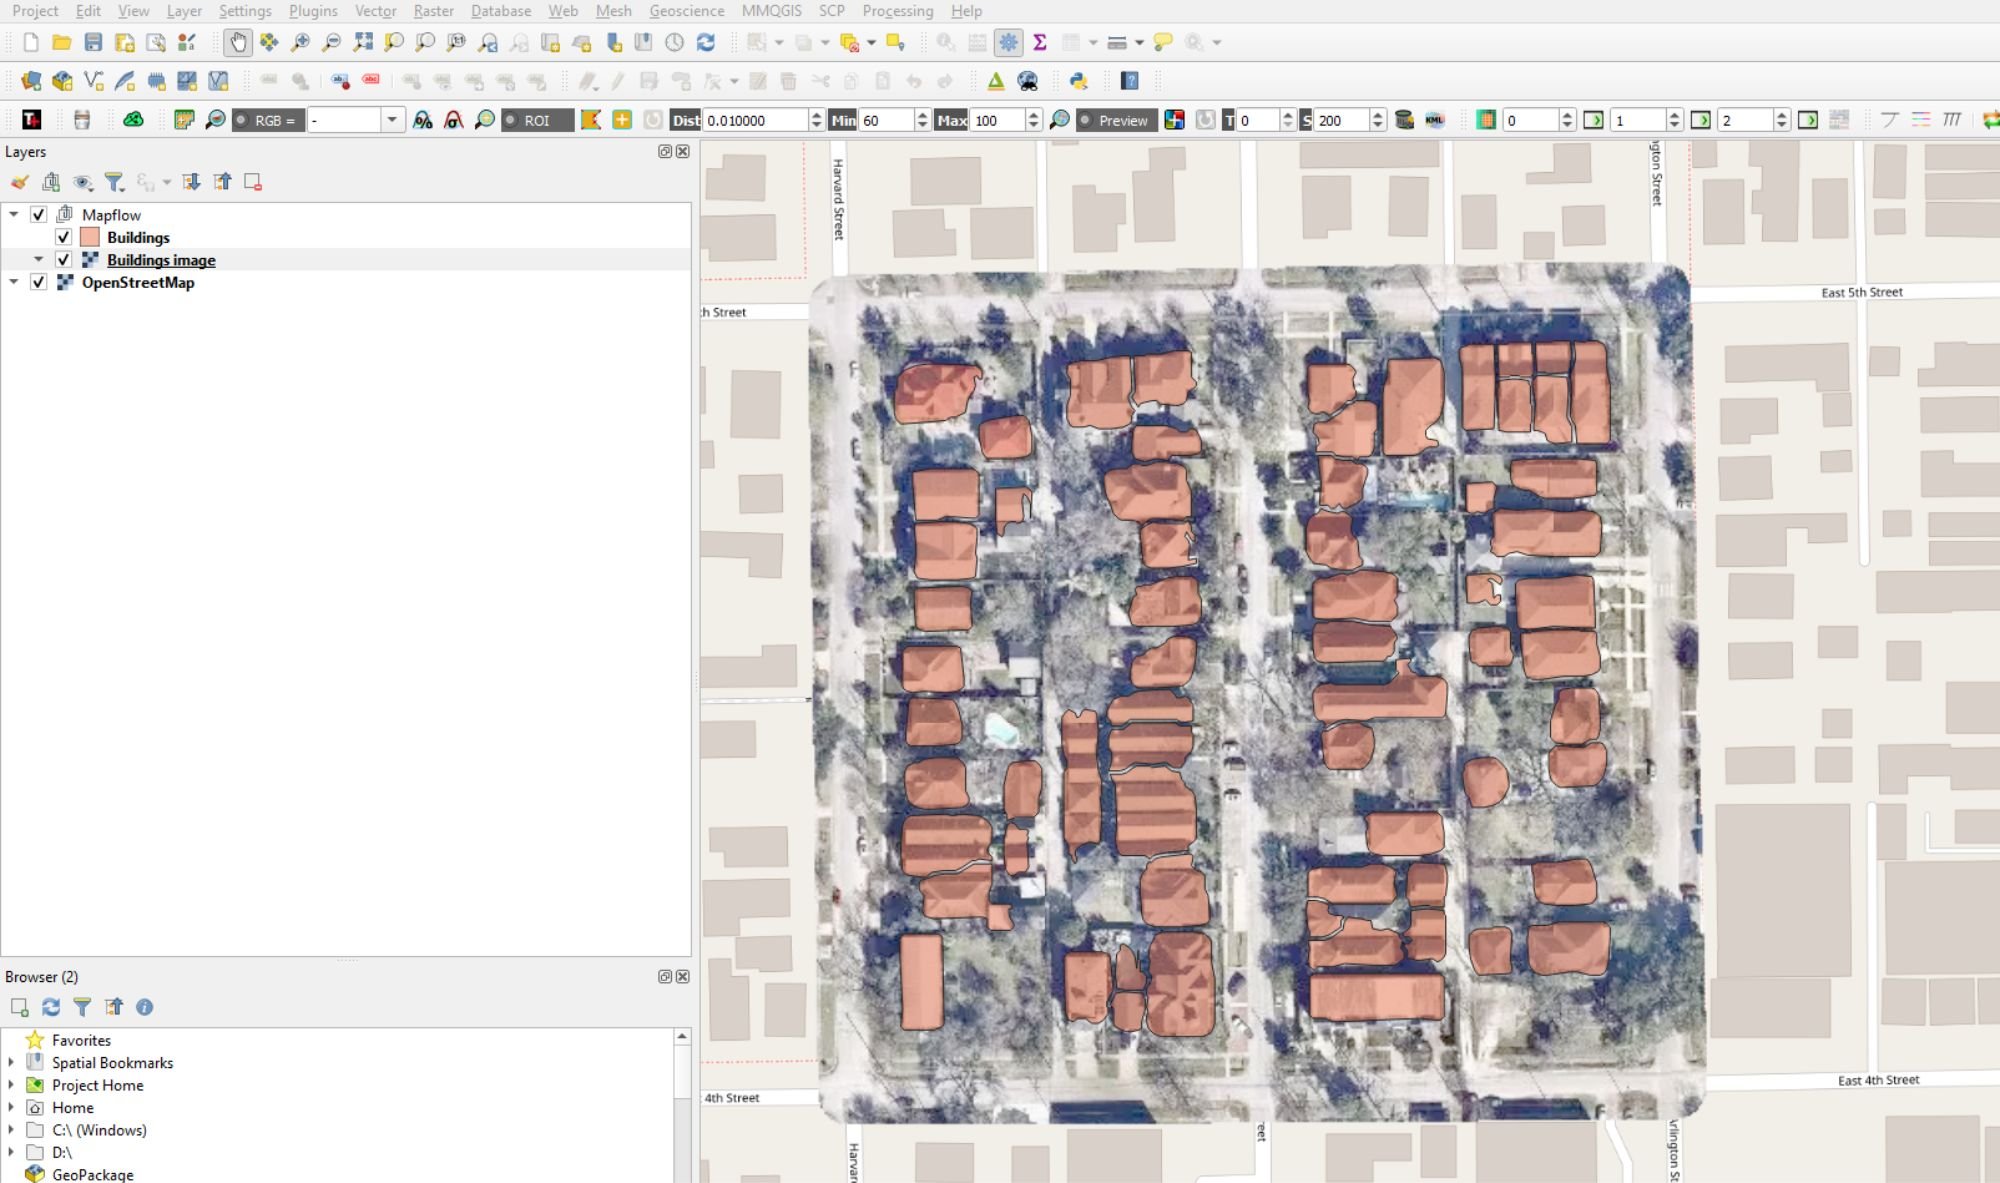 A screenshot of a QGIS map project with building footprints in medium orange over a clipped aerial image.